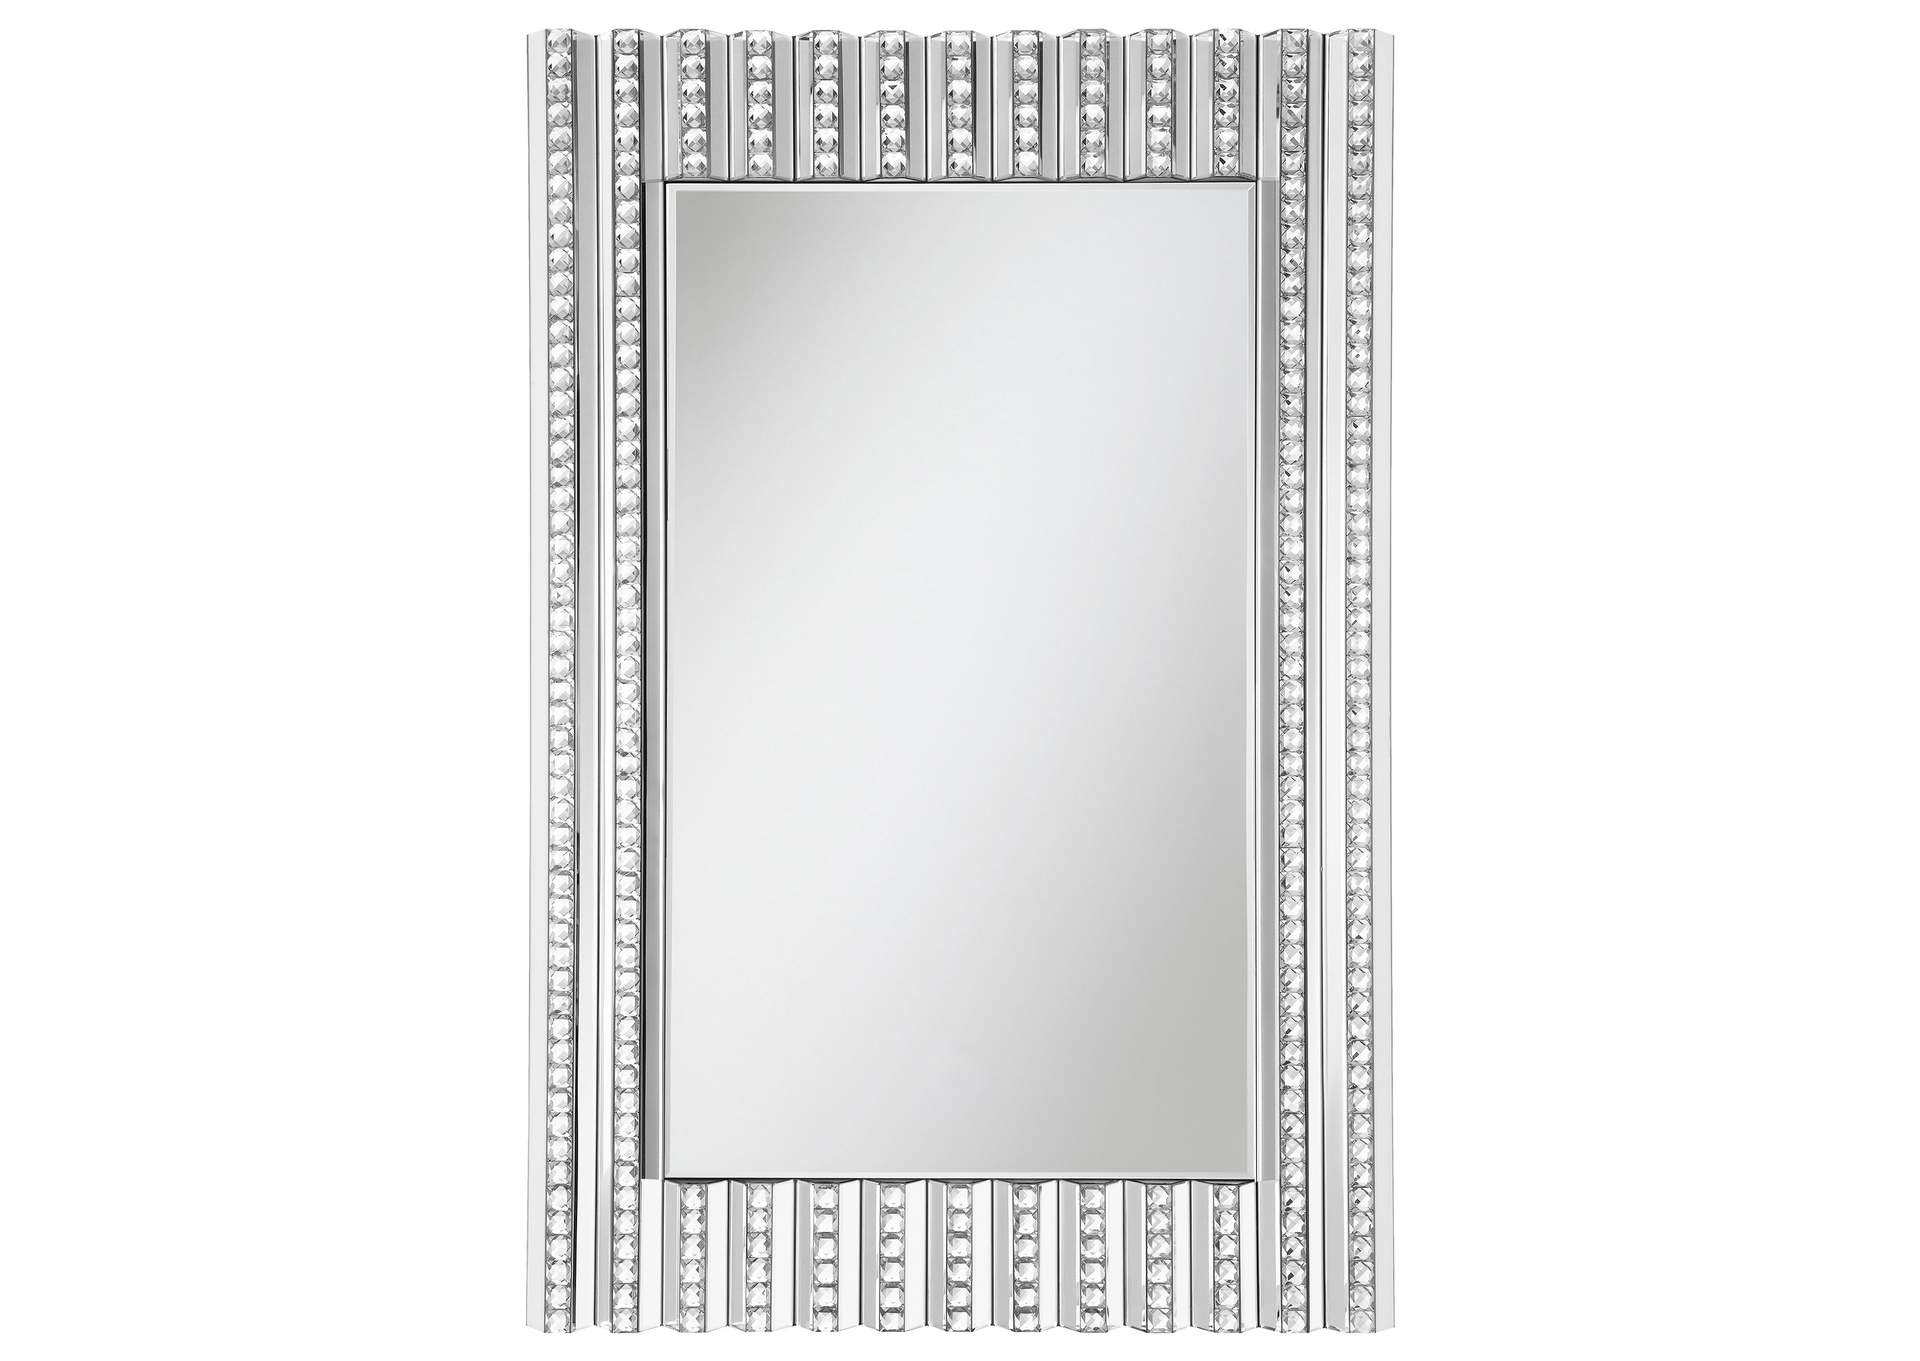 Aideen Rectangular Wall Mirror with Vertical Stripes of Faux Crystals,Coaster Furniture